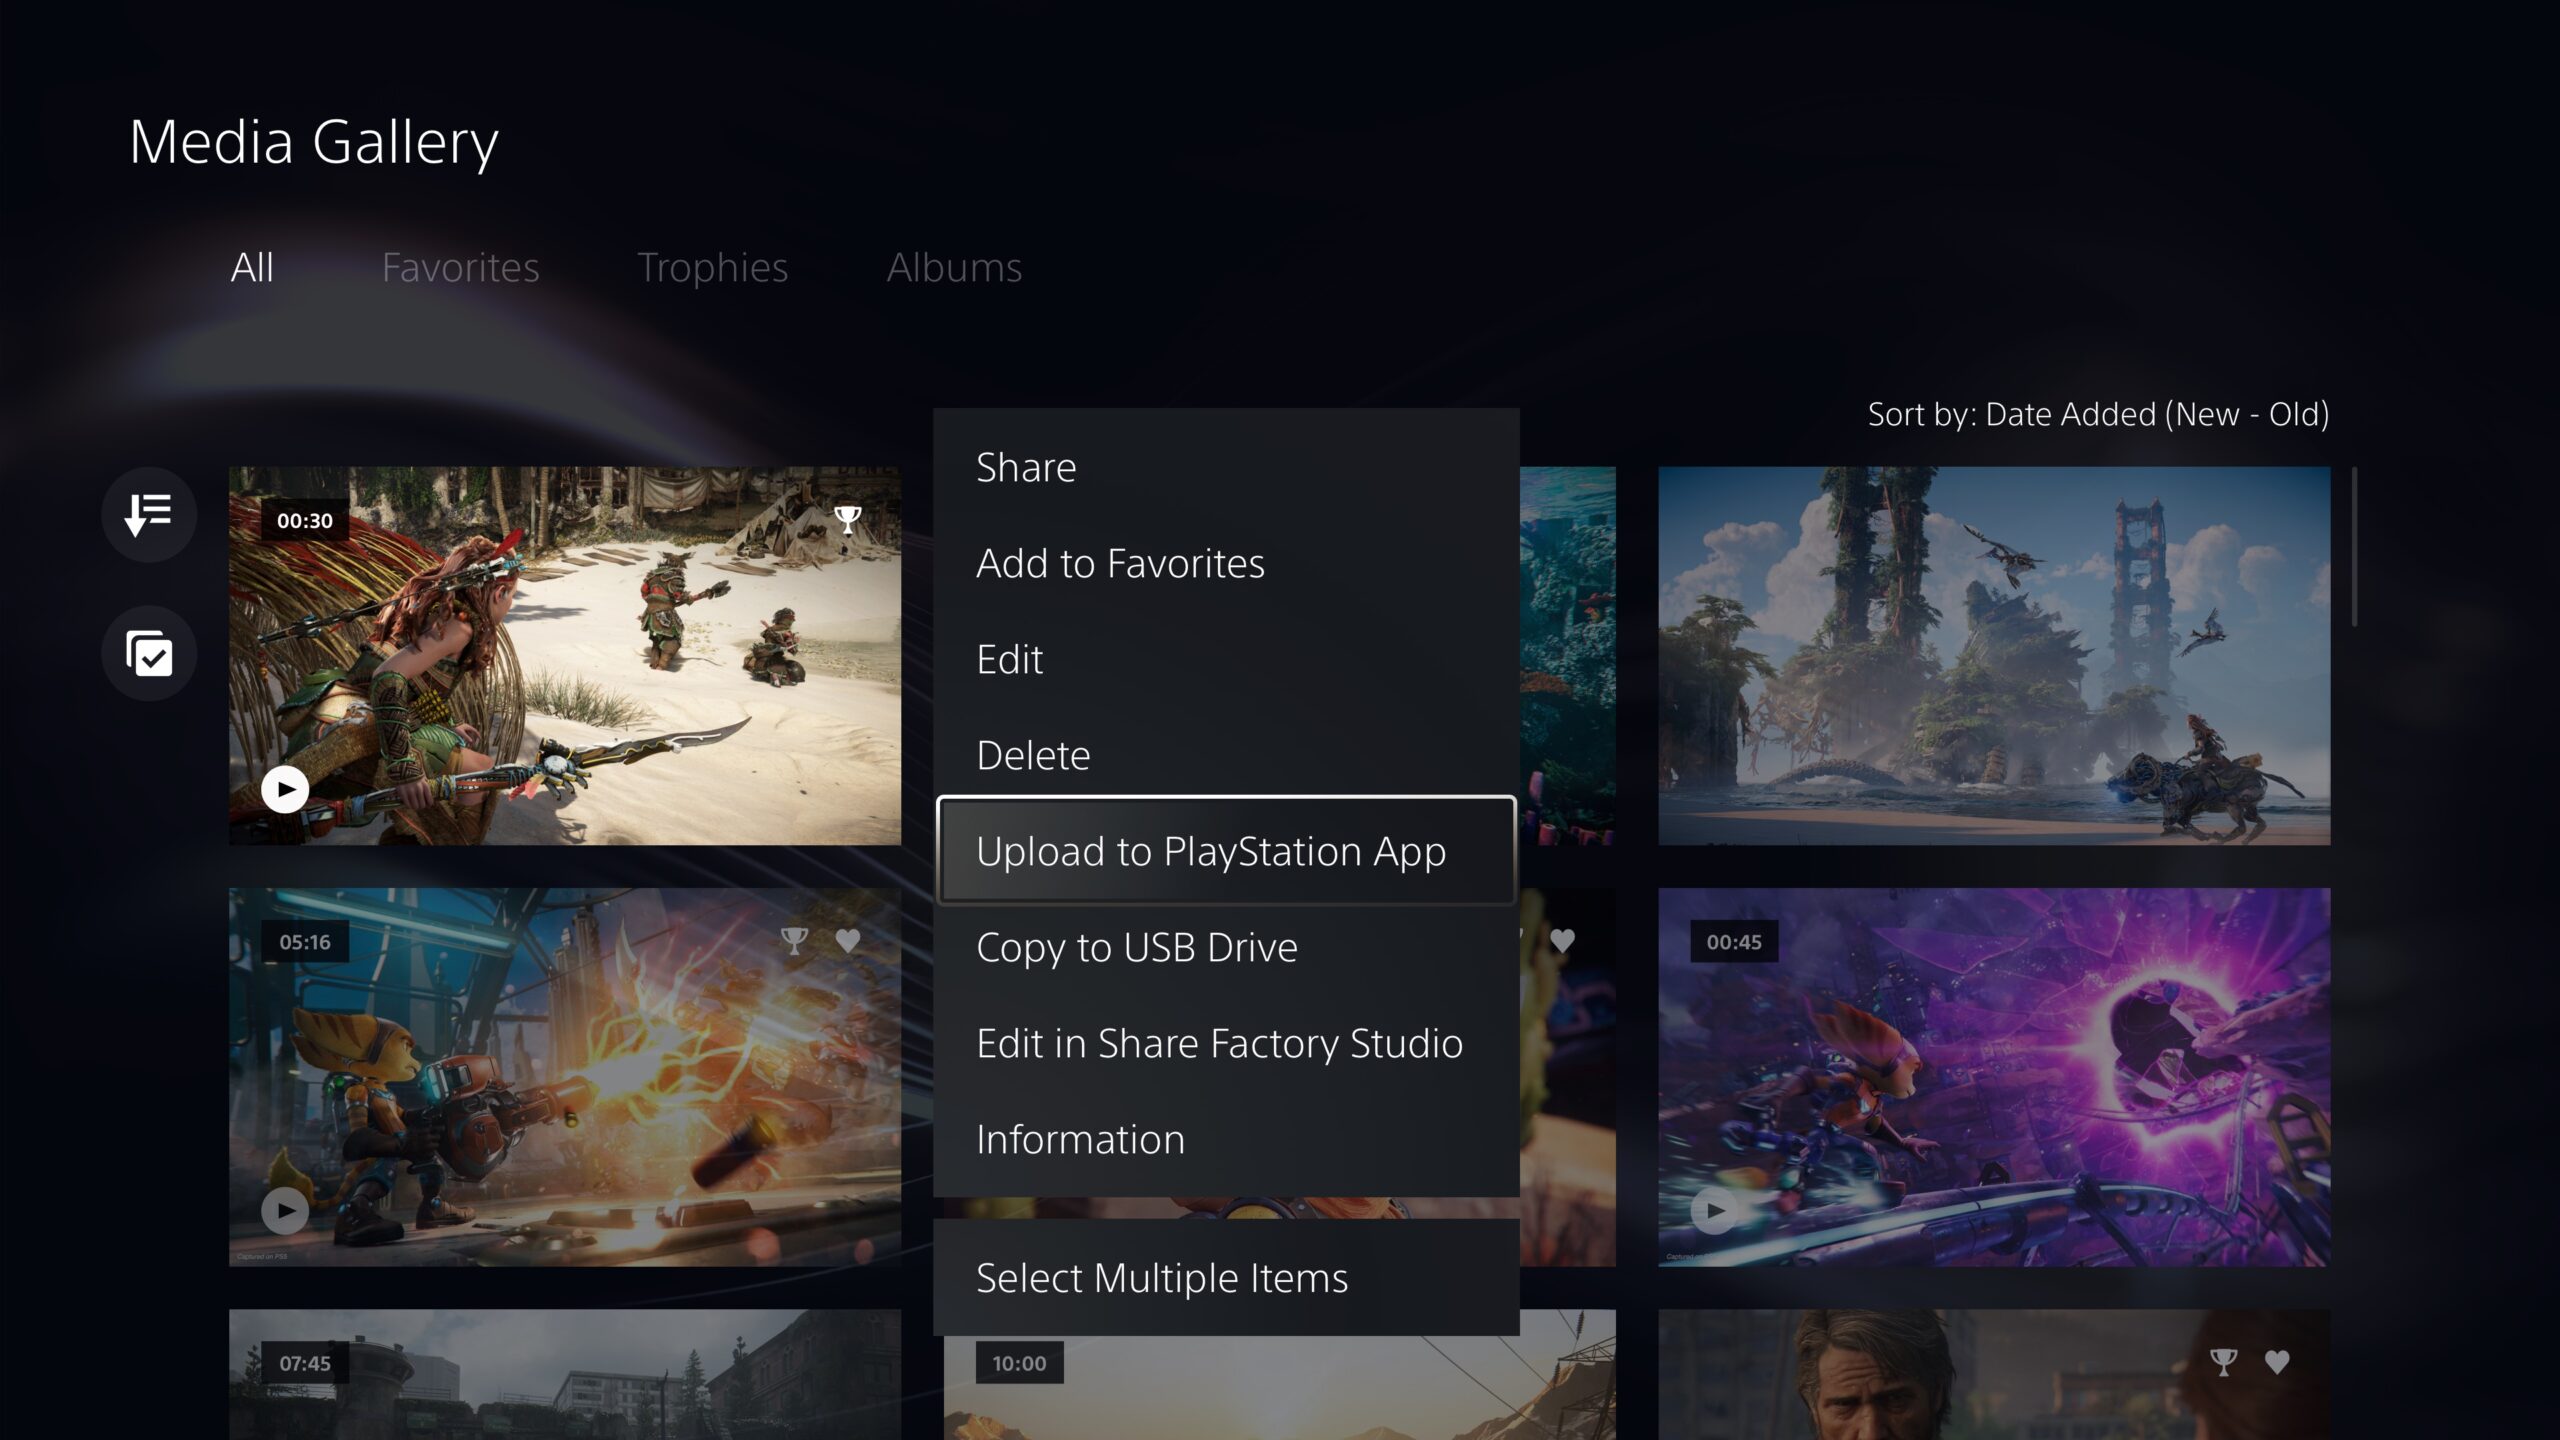 This will allow you to share the media on your socials via the PlayStation app.